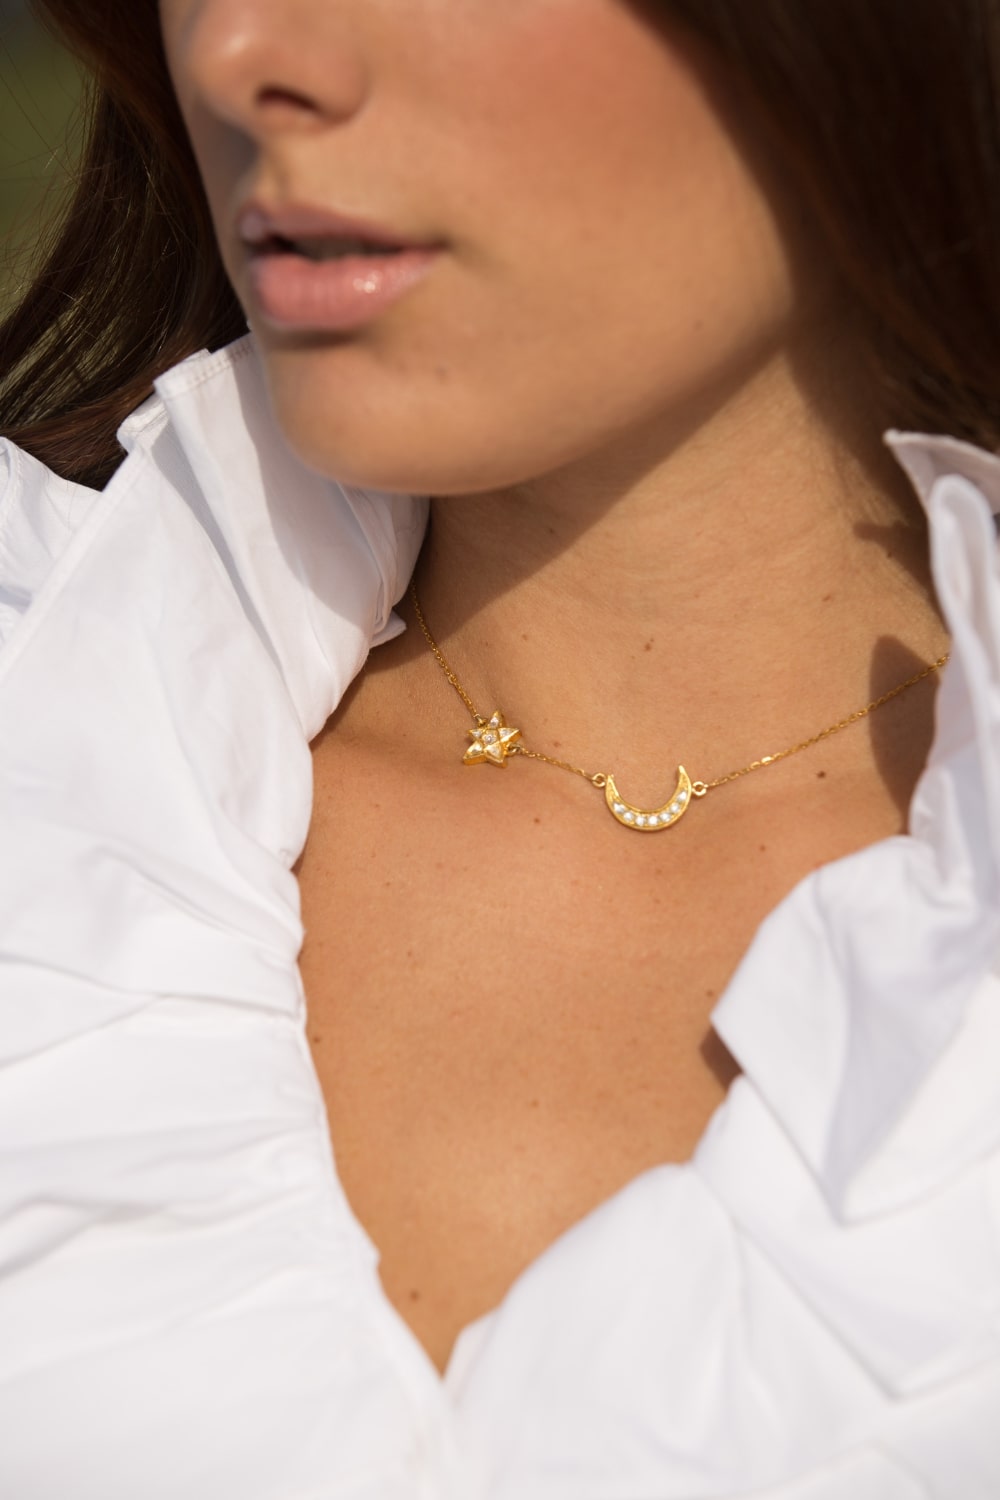 The Crescent & Star Polki Necklace